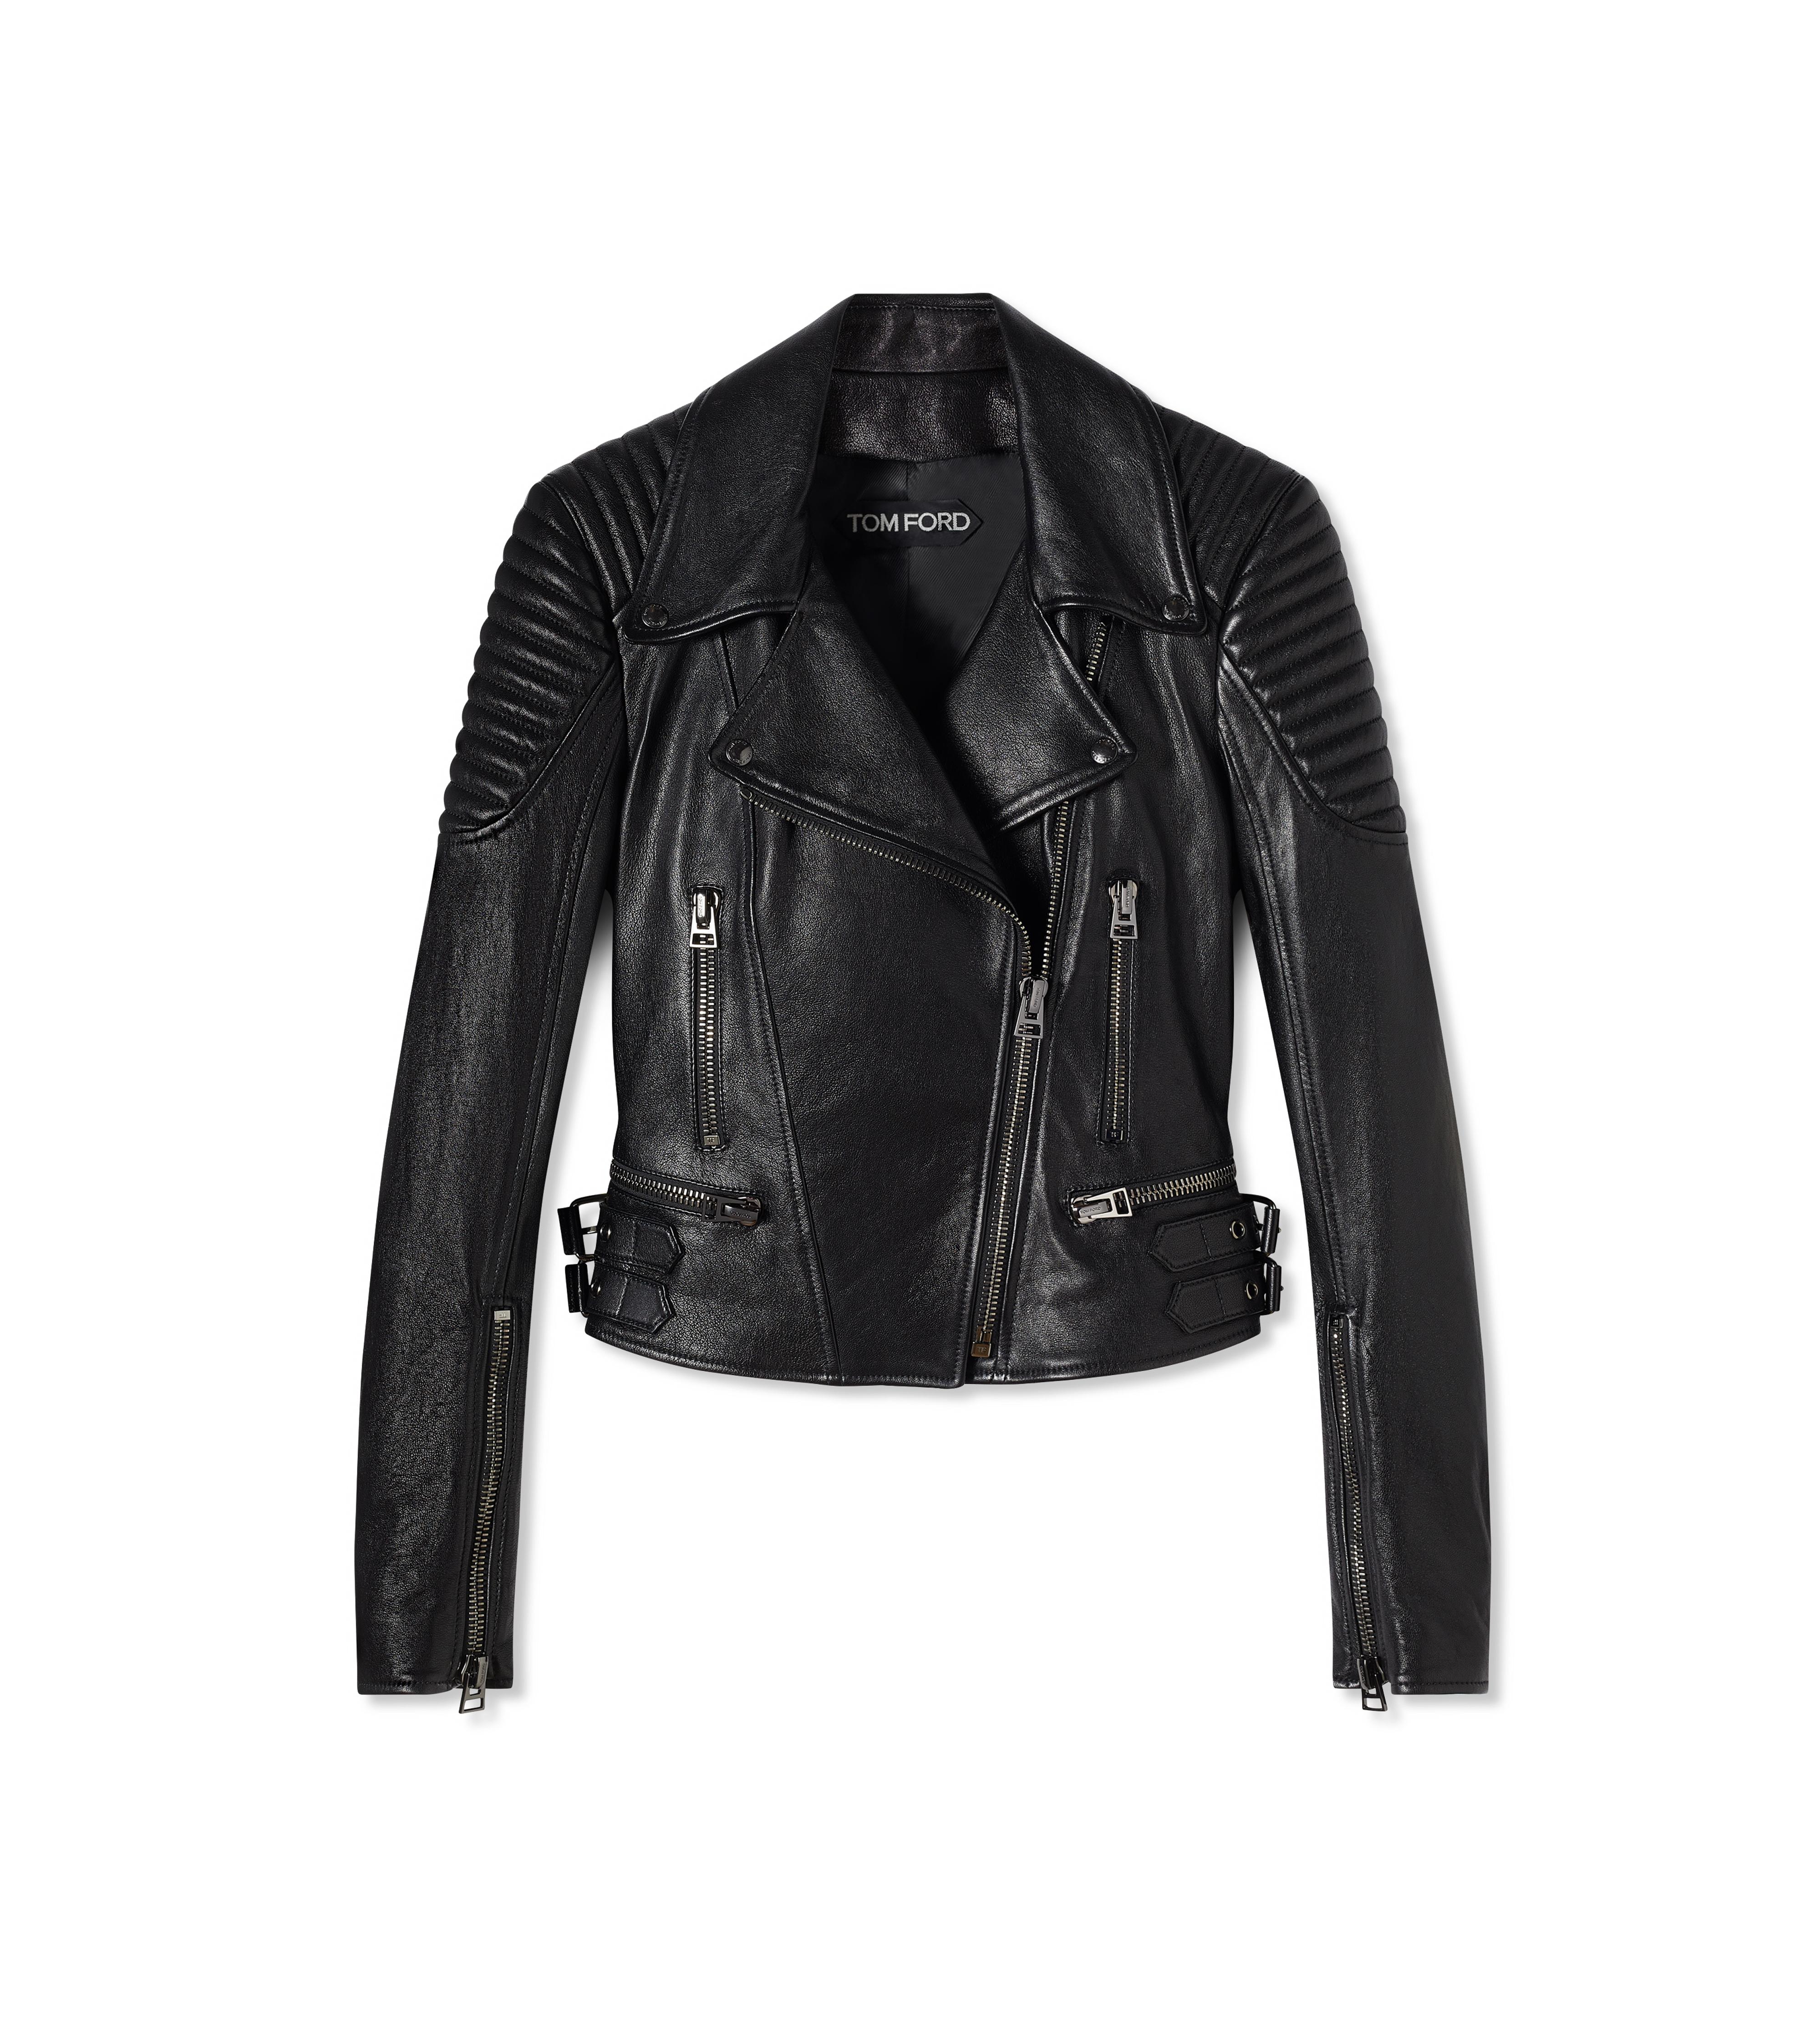 Introducir 36+ imagen tom ford jacket leather